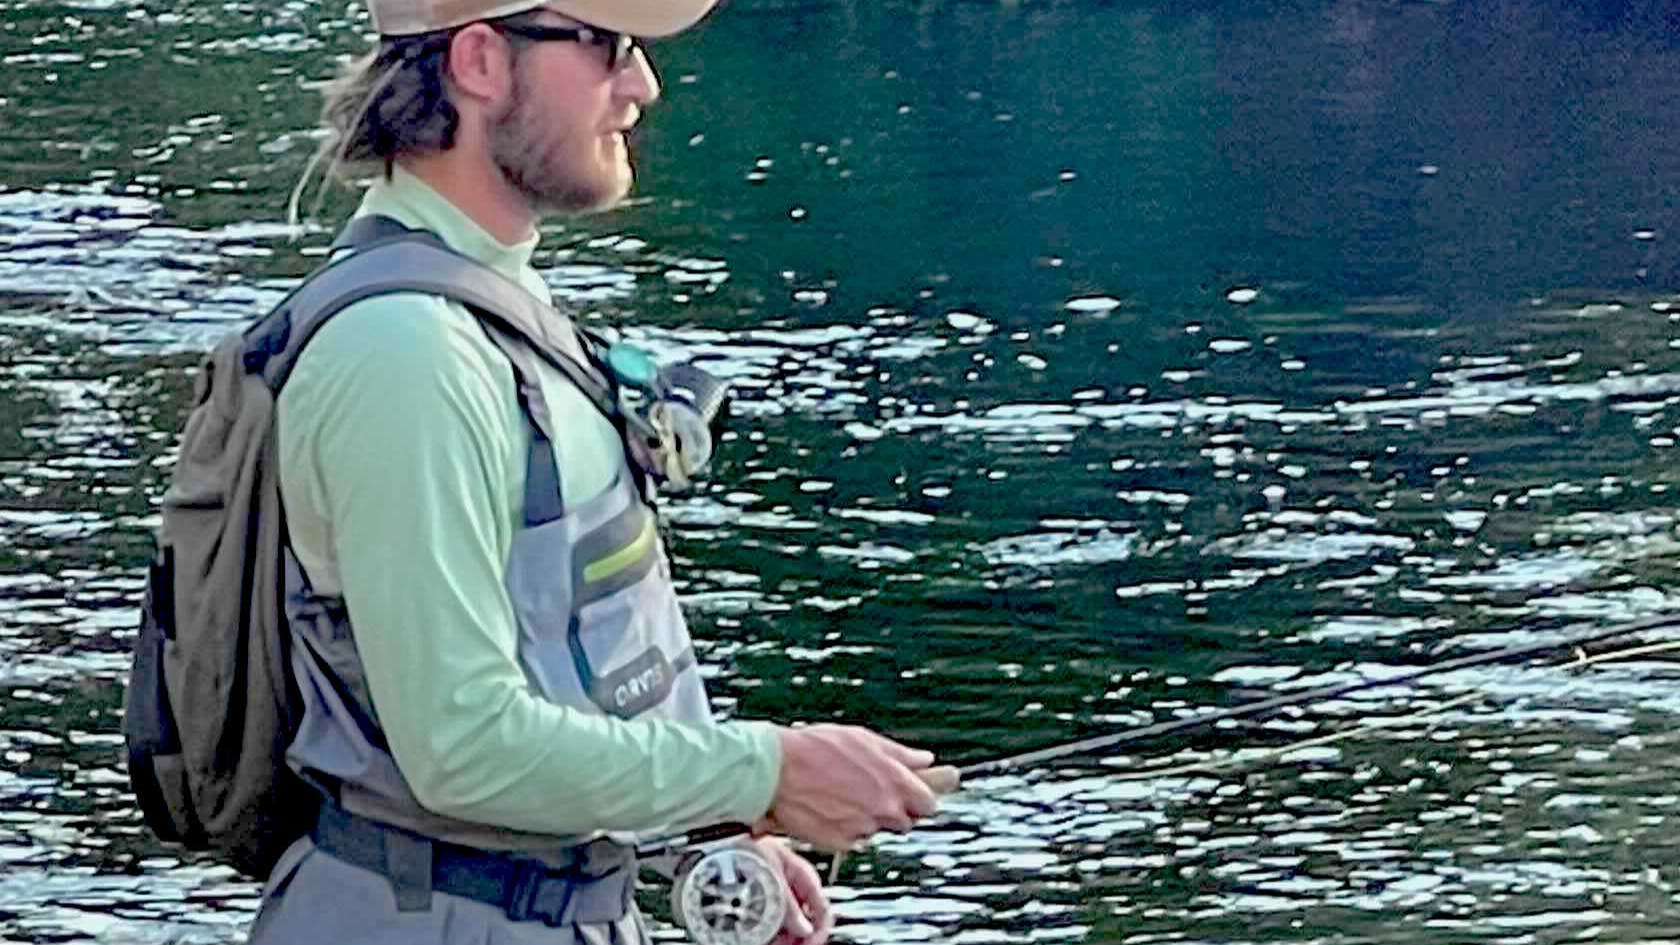 Curated Expert Charles Edington, fishing and wearing the Orvis Ultralight Convertible Waders